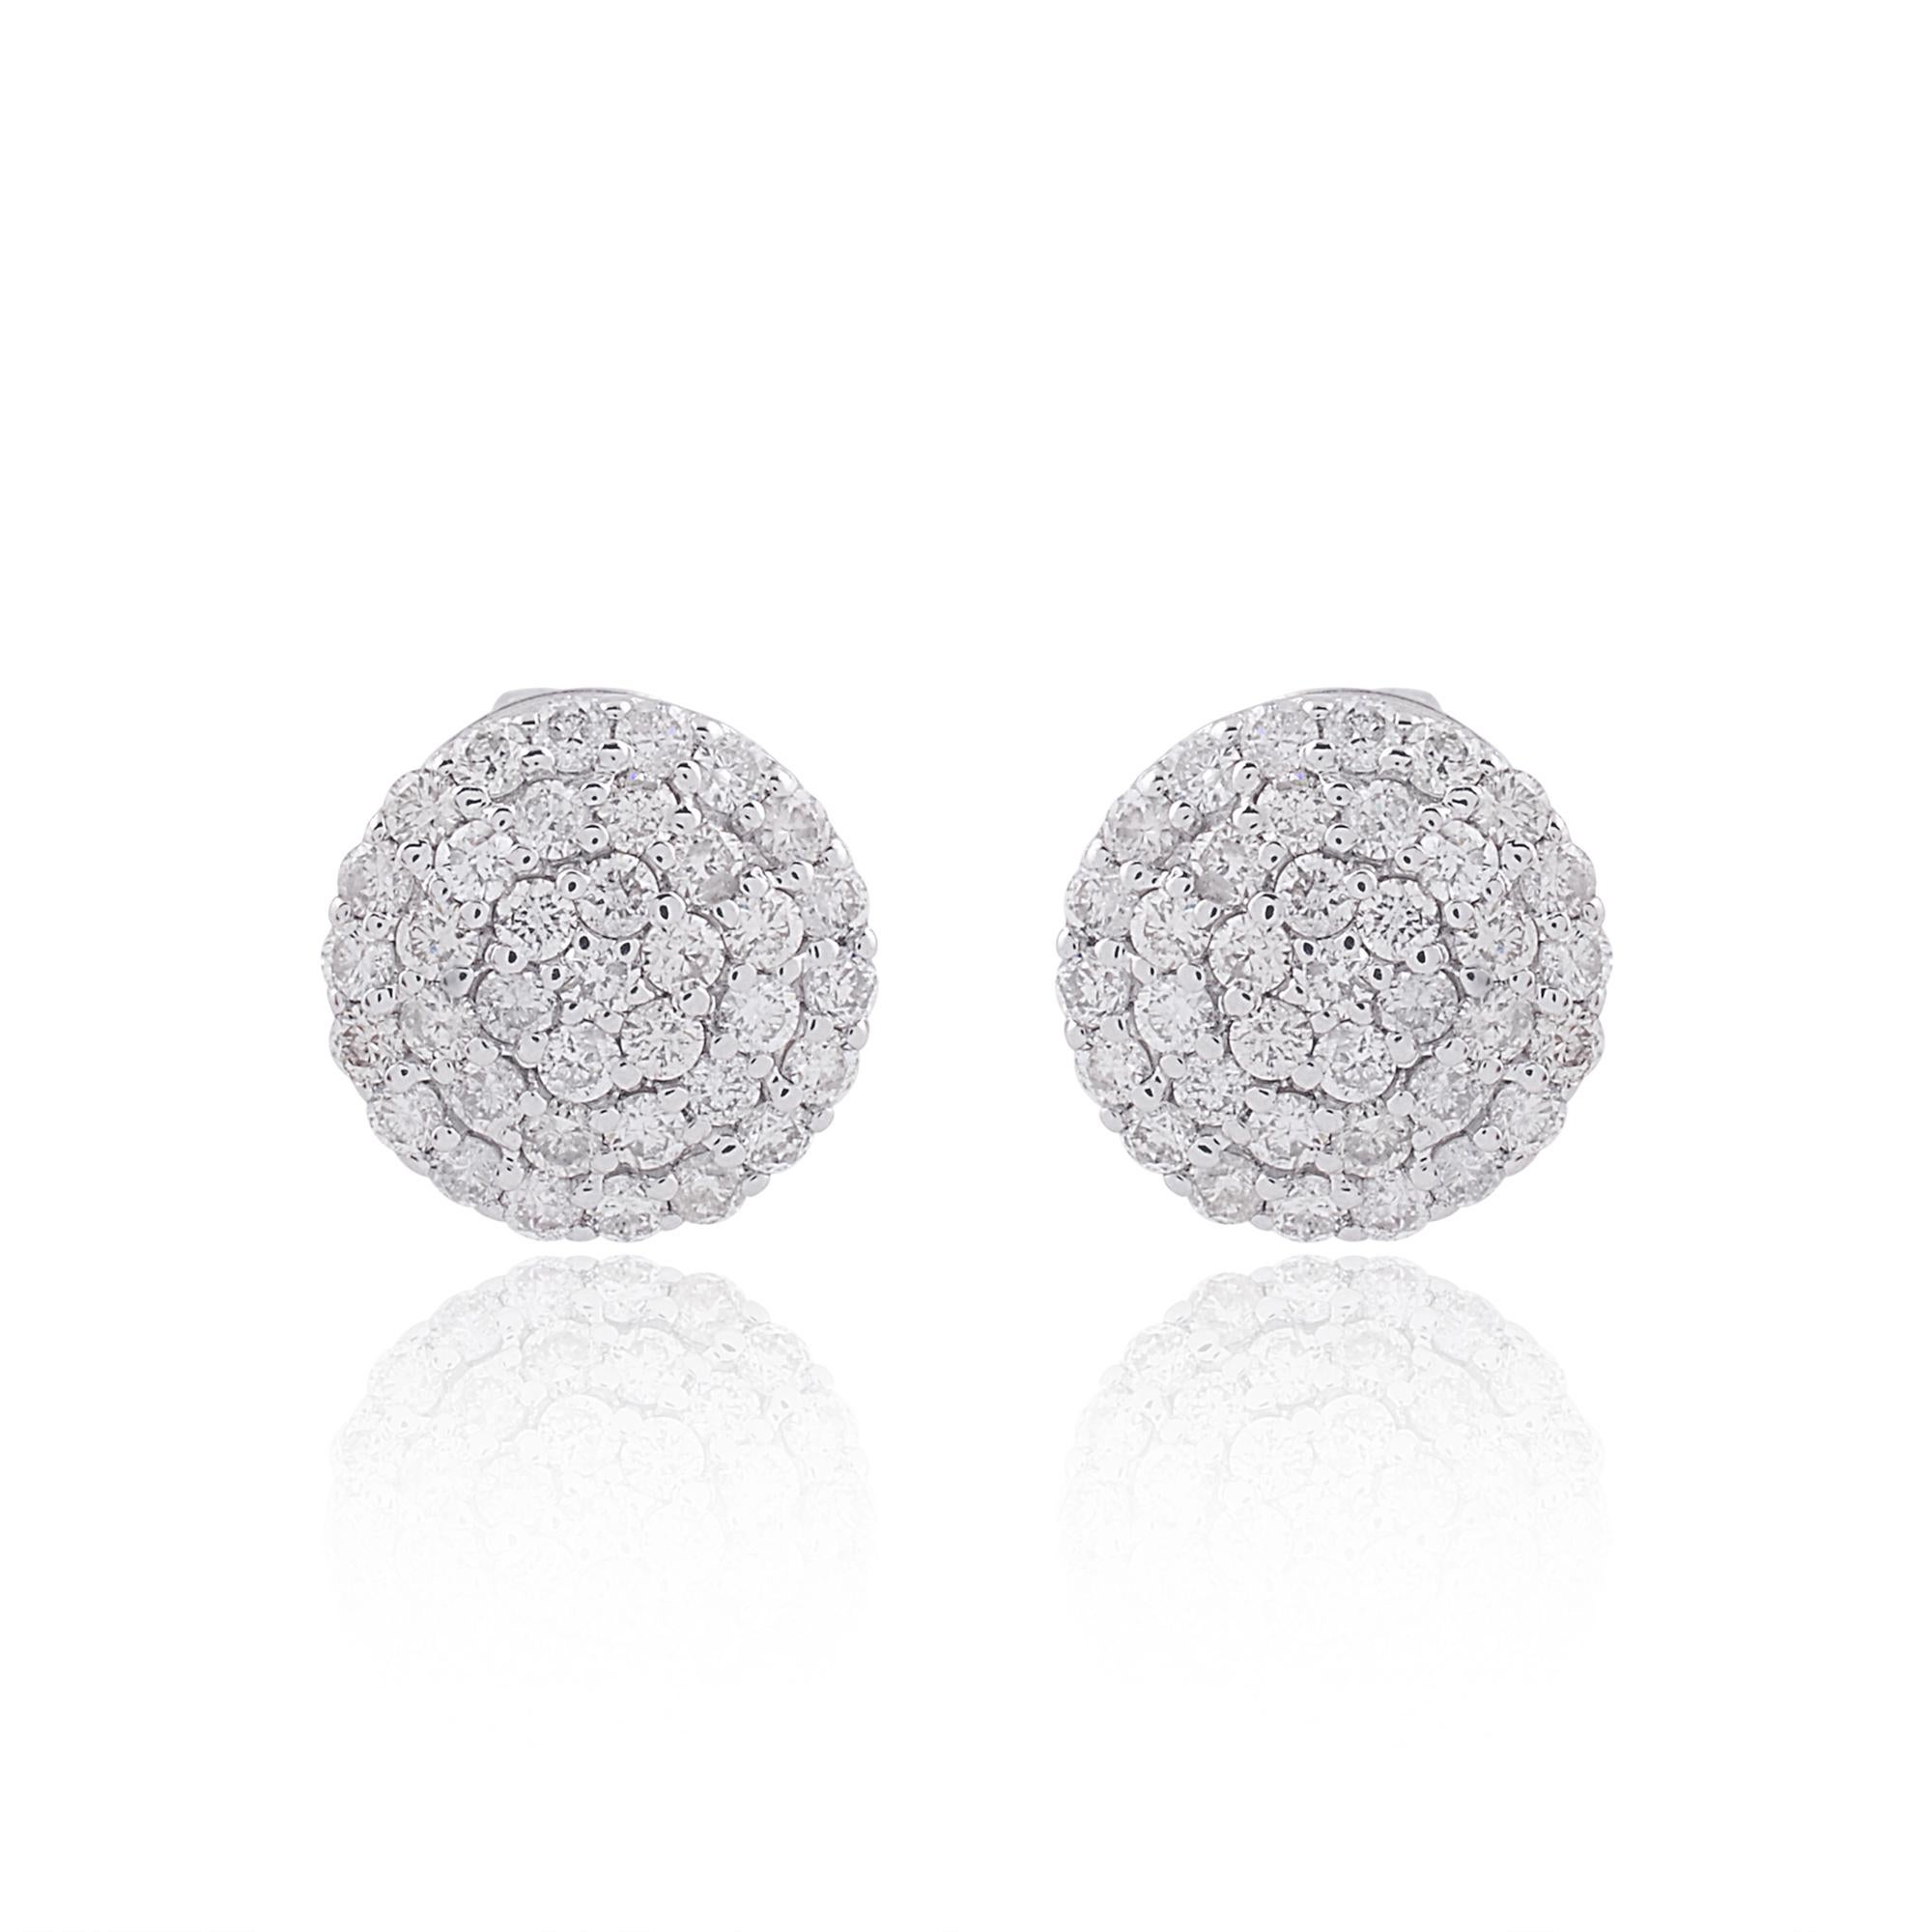 Illuminate your ensemble with the enchanting sparkle of these Natural 0.65 Carat Round Diamond Disc Stud Earrings, elegantly crafted in gleaming 10 Karat White Gold. These captivating earrings are a celebration of modern elegance and sophistication,